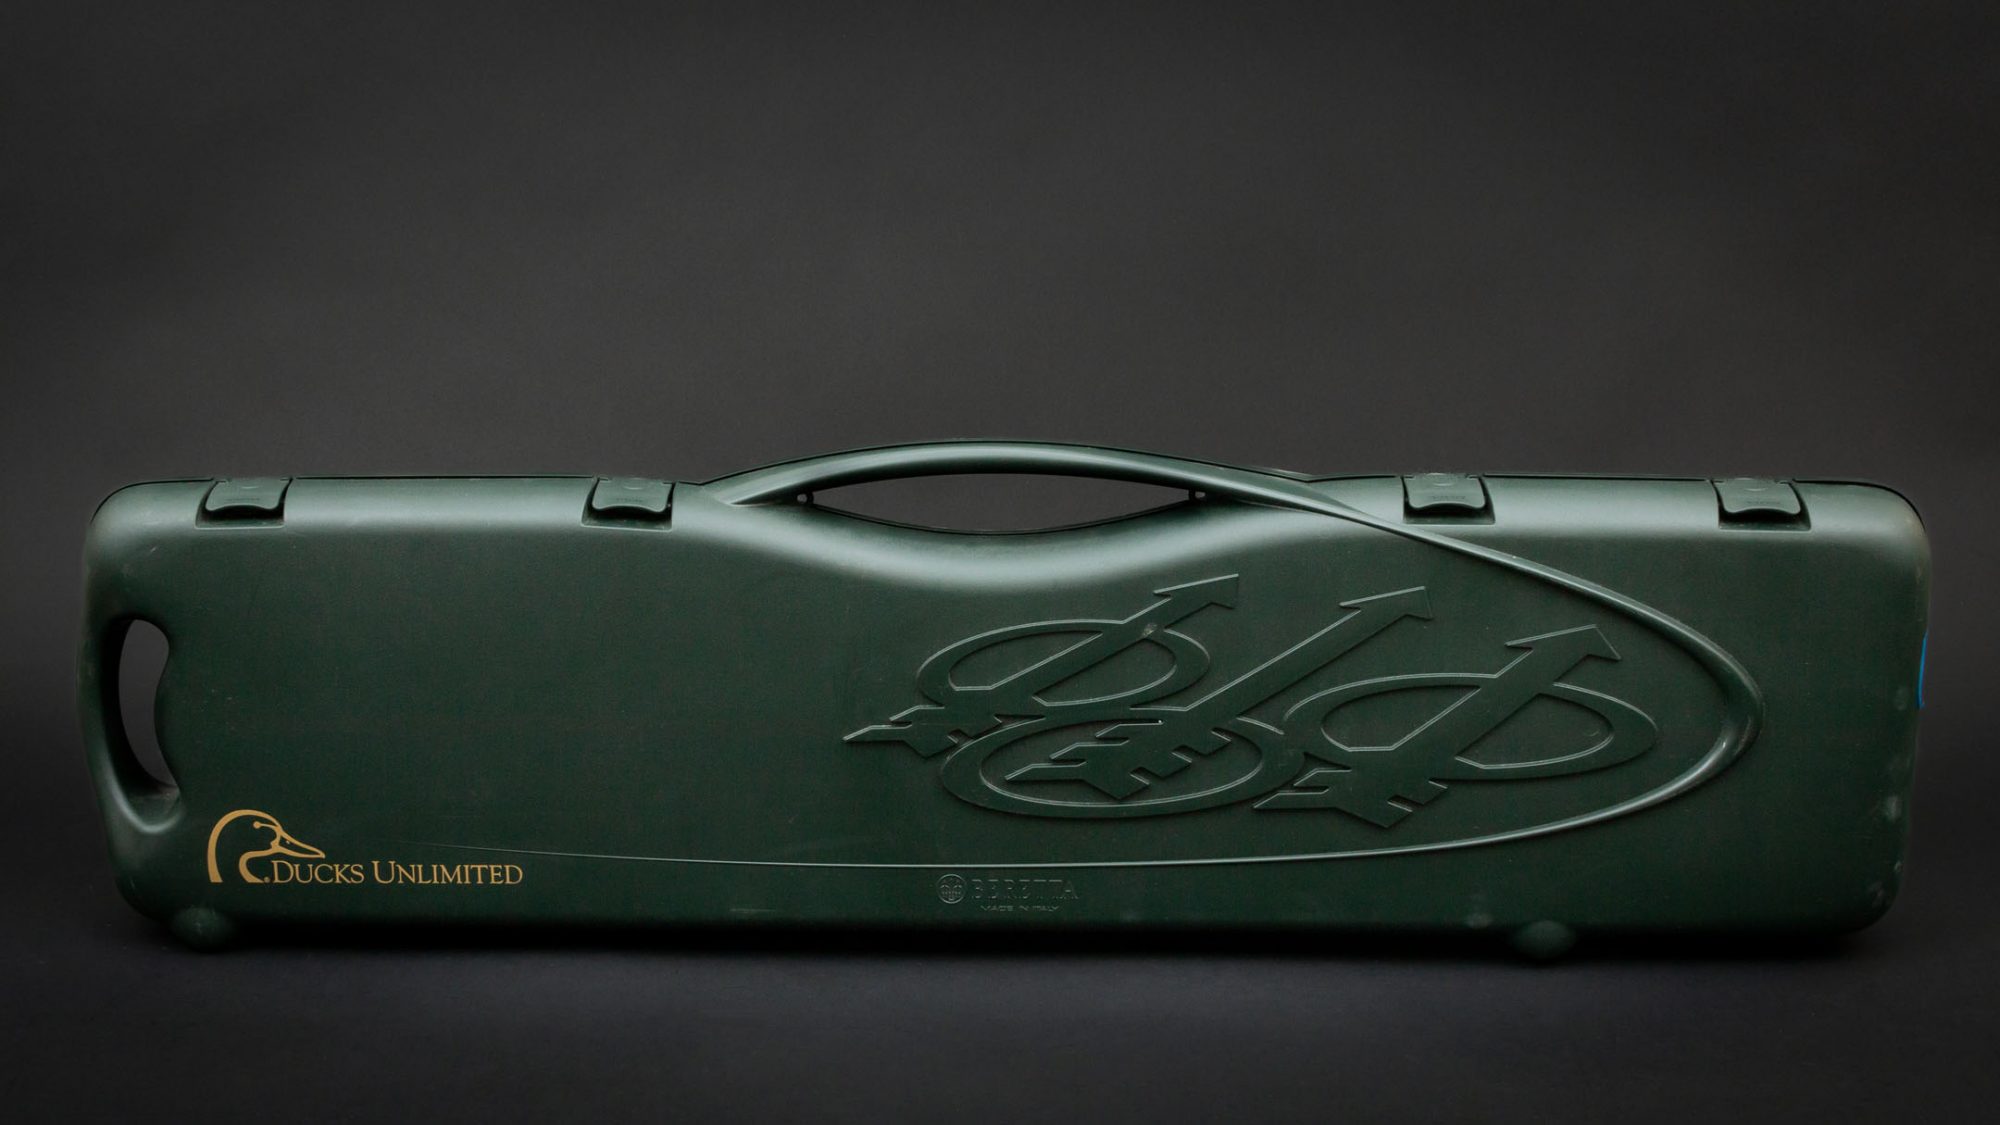 Case for Ducks Unlimited Beretta A400 Xtreme Plus 12 gauge shotgun, for sale by Turnbull Restoration Co. of Bloomfield, NY